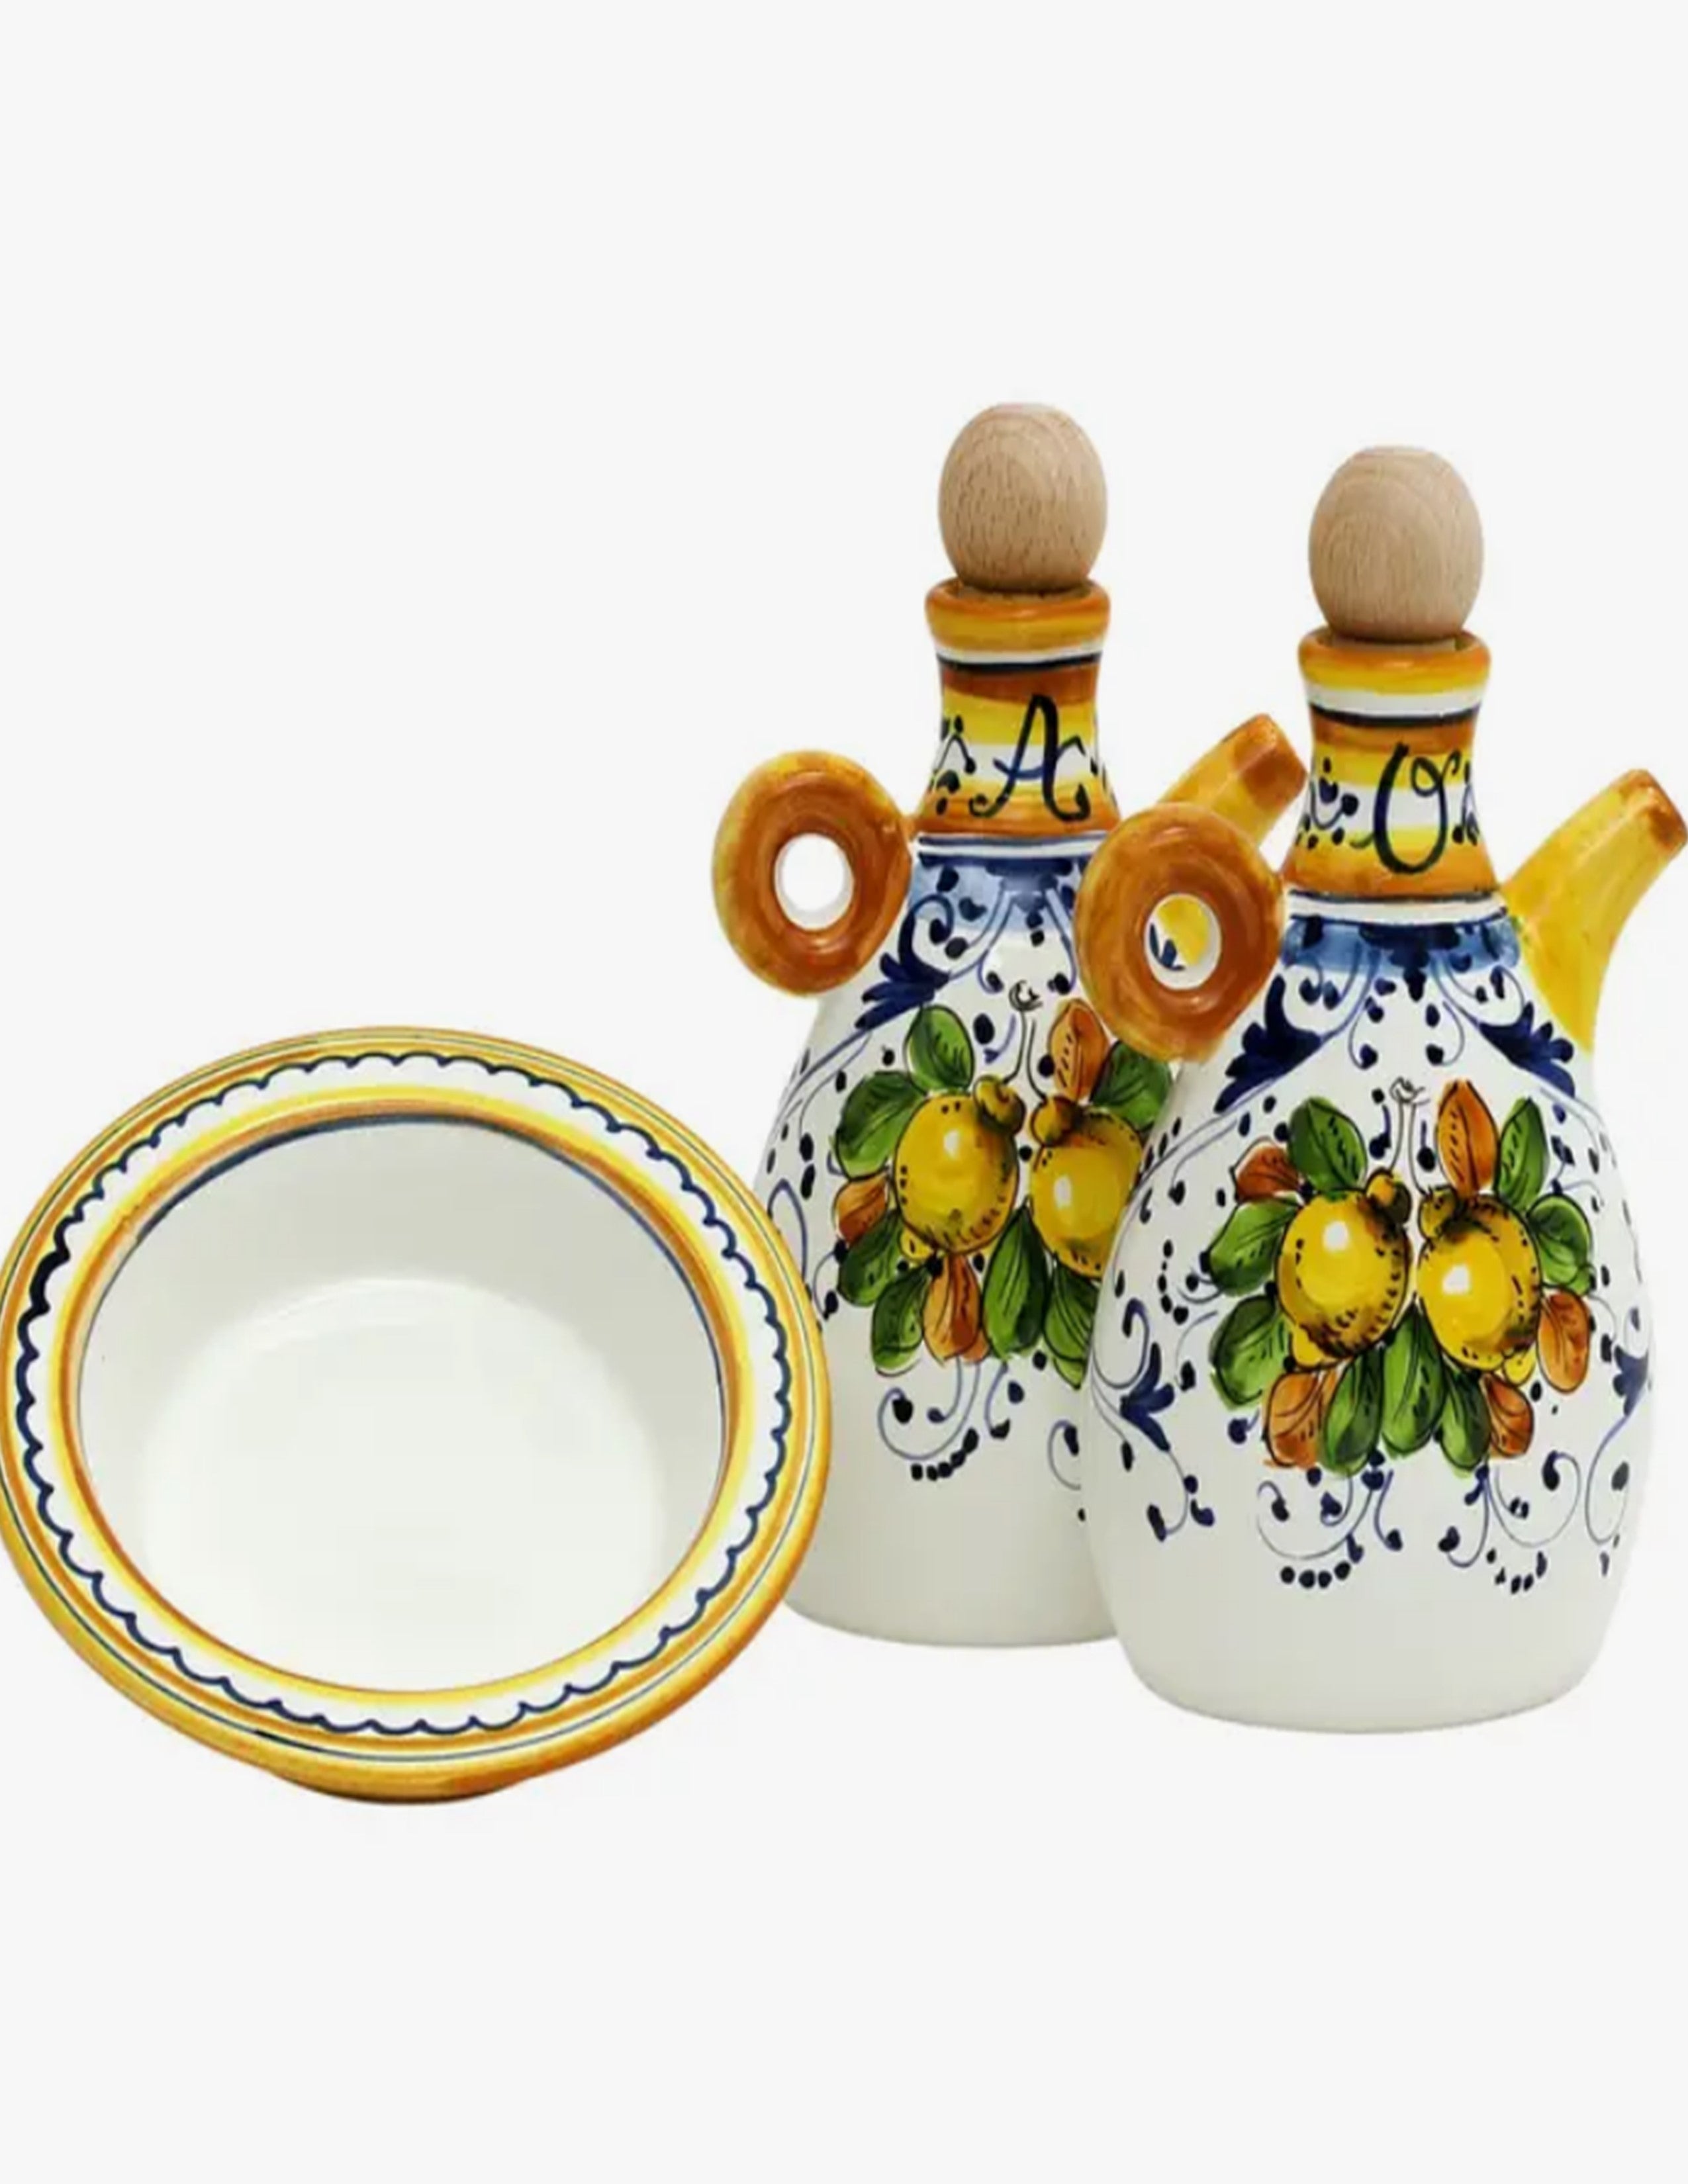 Olio E Aceto, Vintage Hand Crafted Oil and Vinegar Set From Deruta, Italy,  1970s 